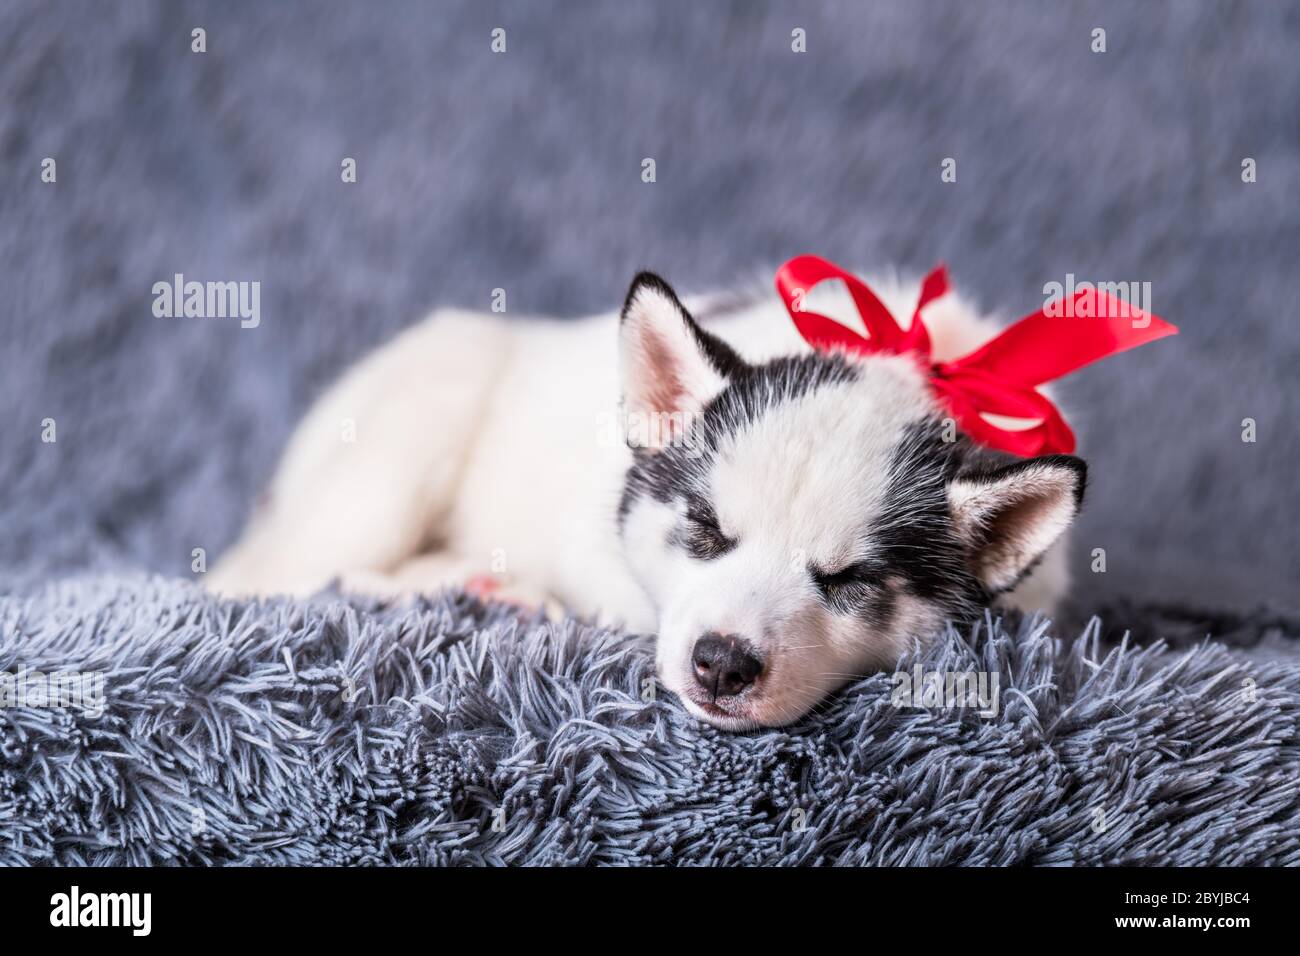 Dogs Birthday Banque D Image Et Photos Alamy